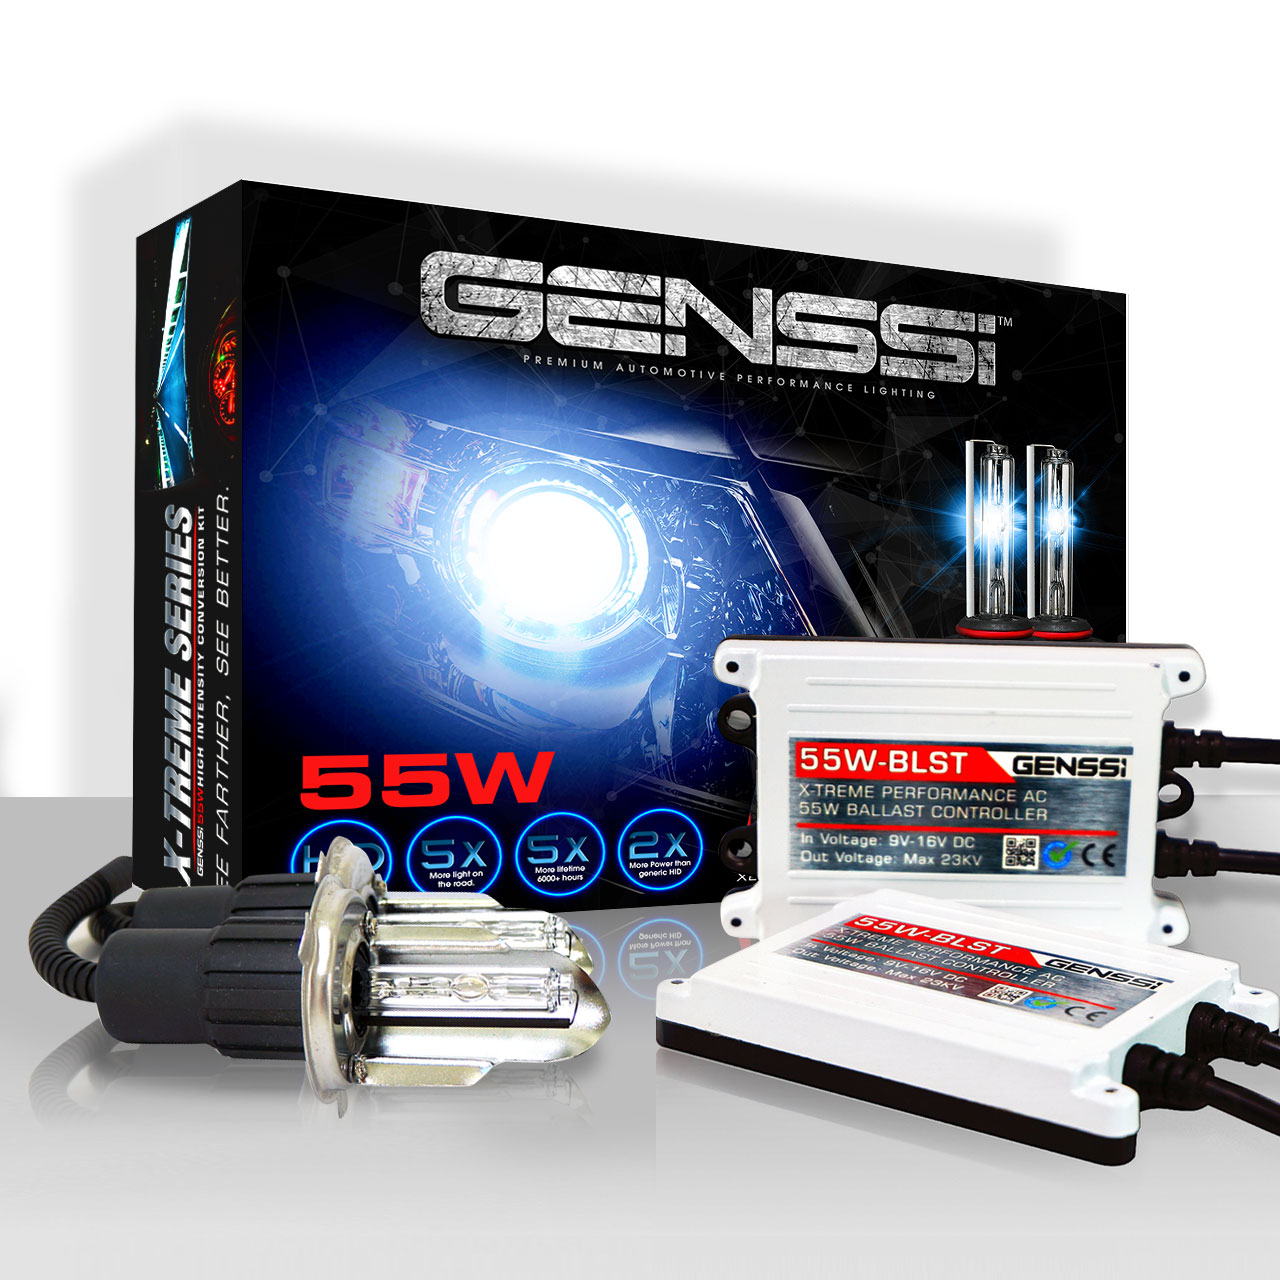 Genssi 55WAC Product image with box